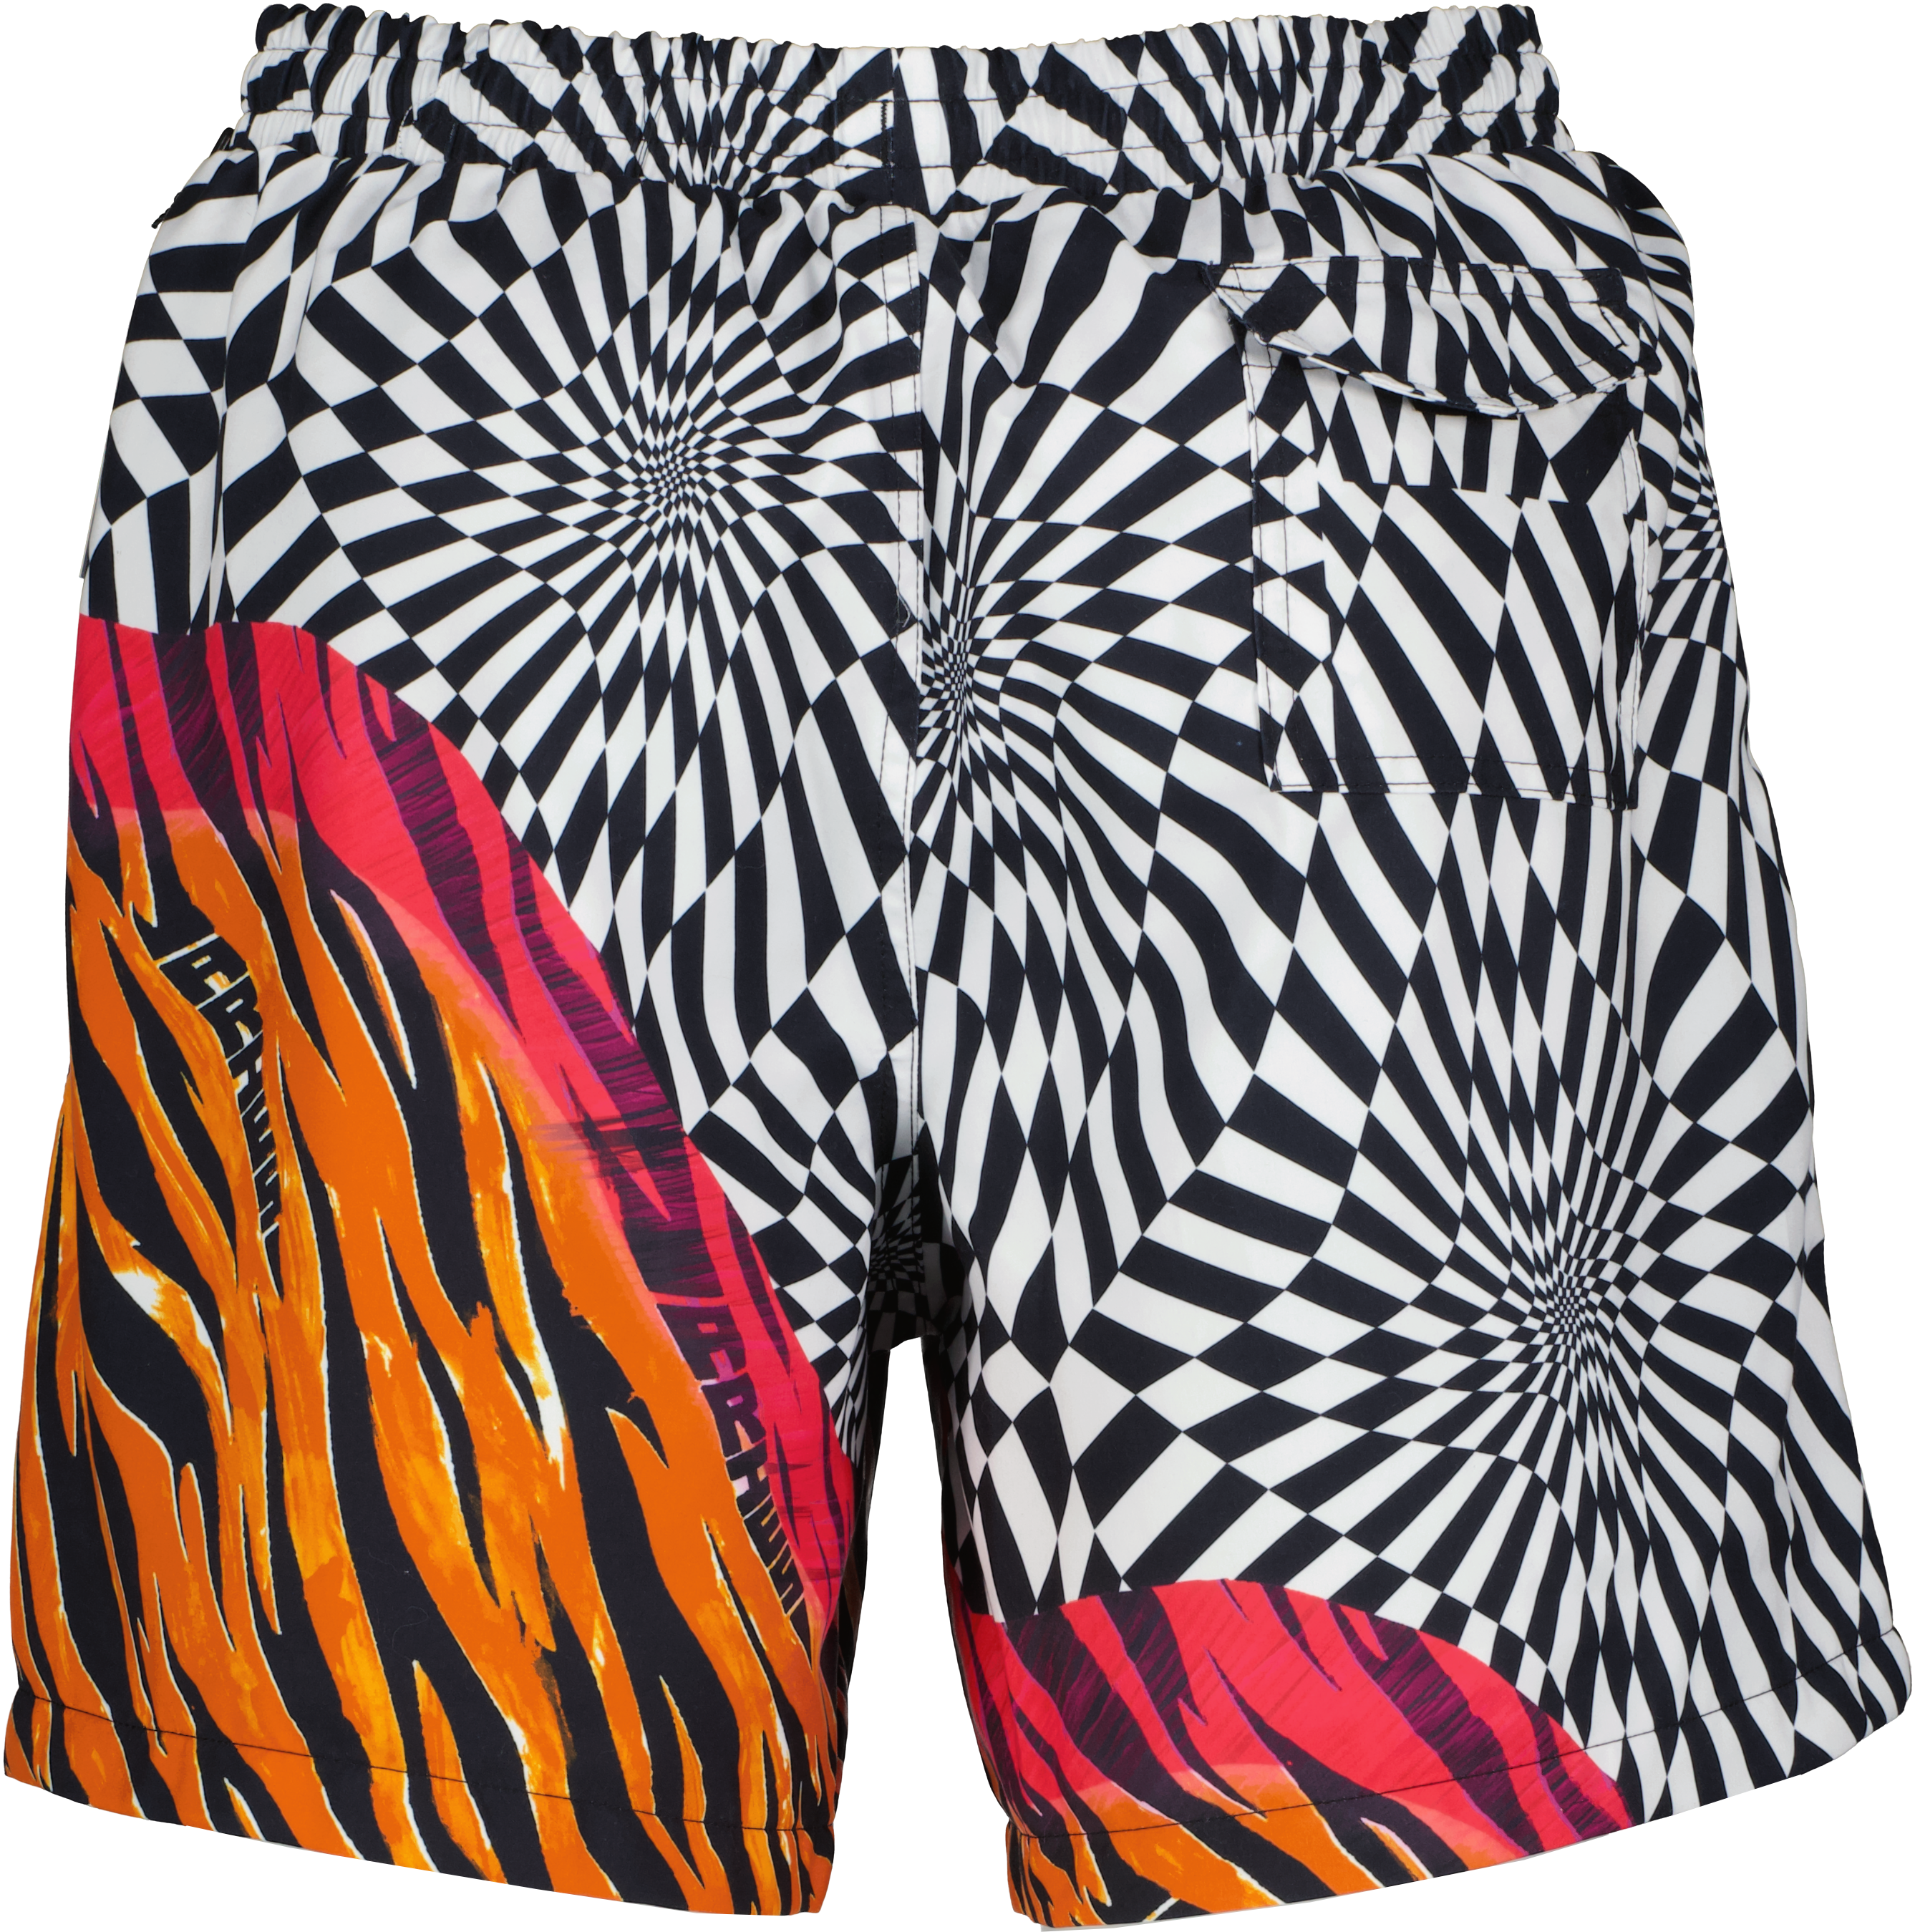 Aries Distorted Check Shorts